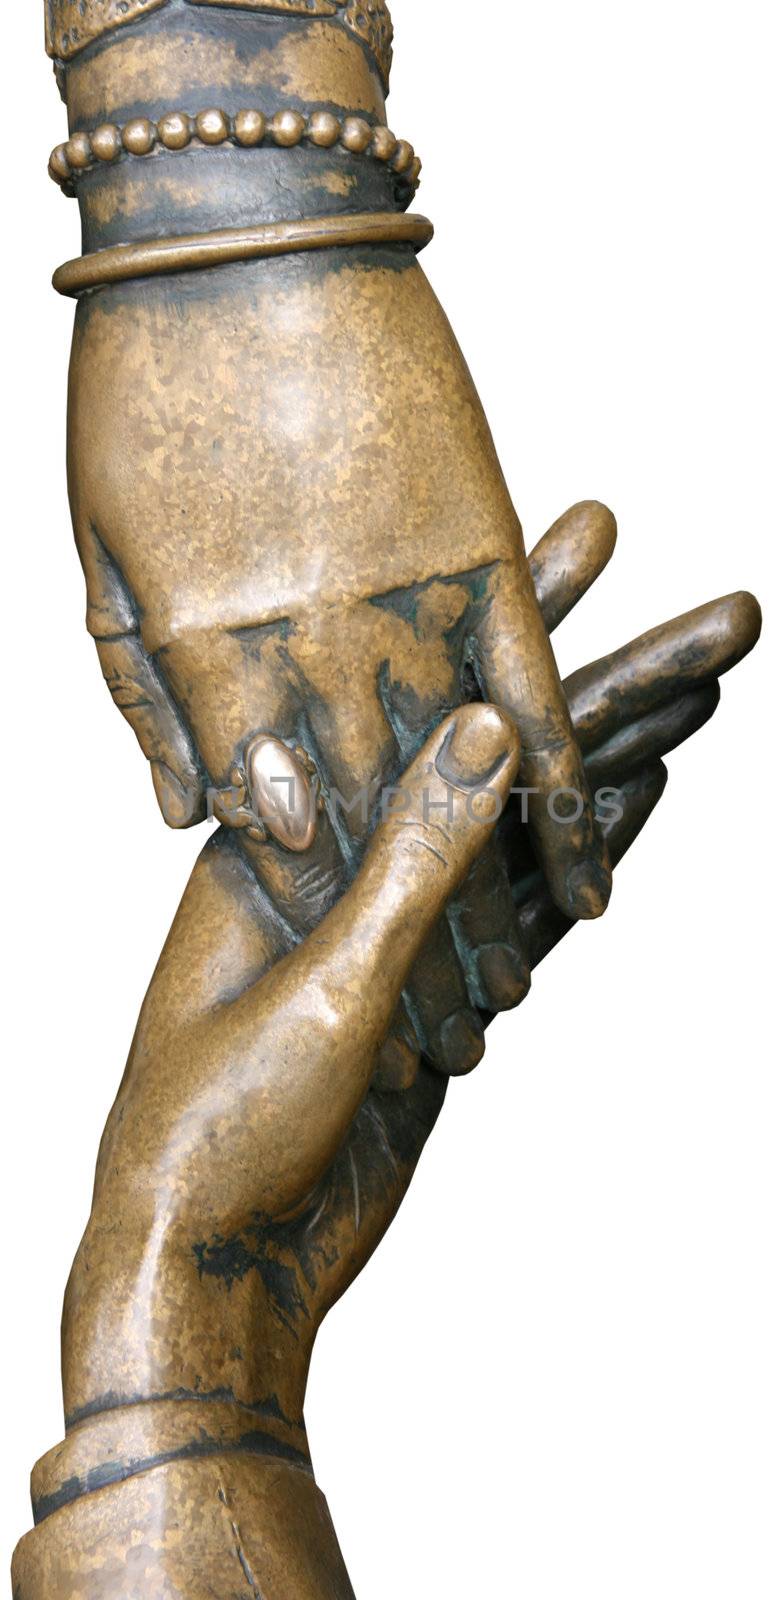 isolated bronze figurine of newlyweds hands by fotosergio